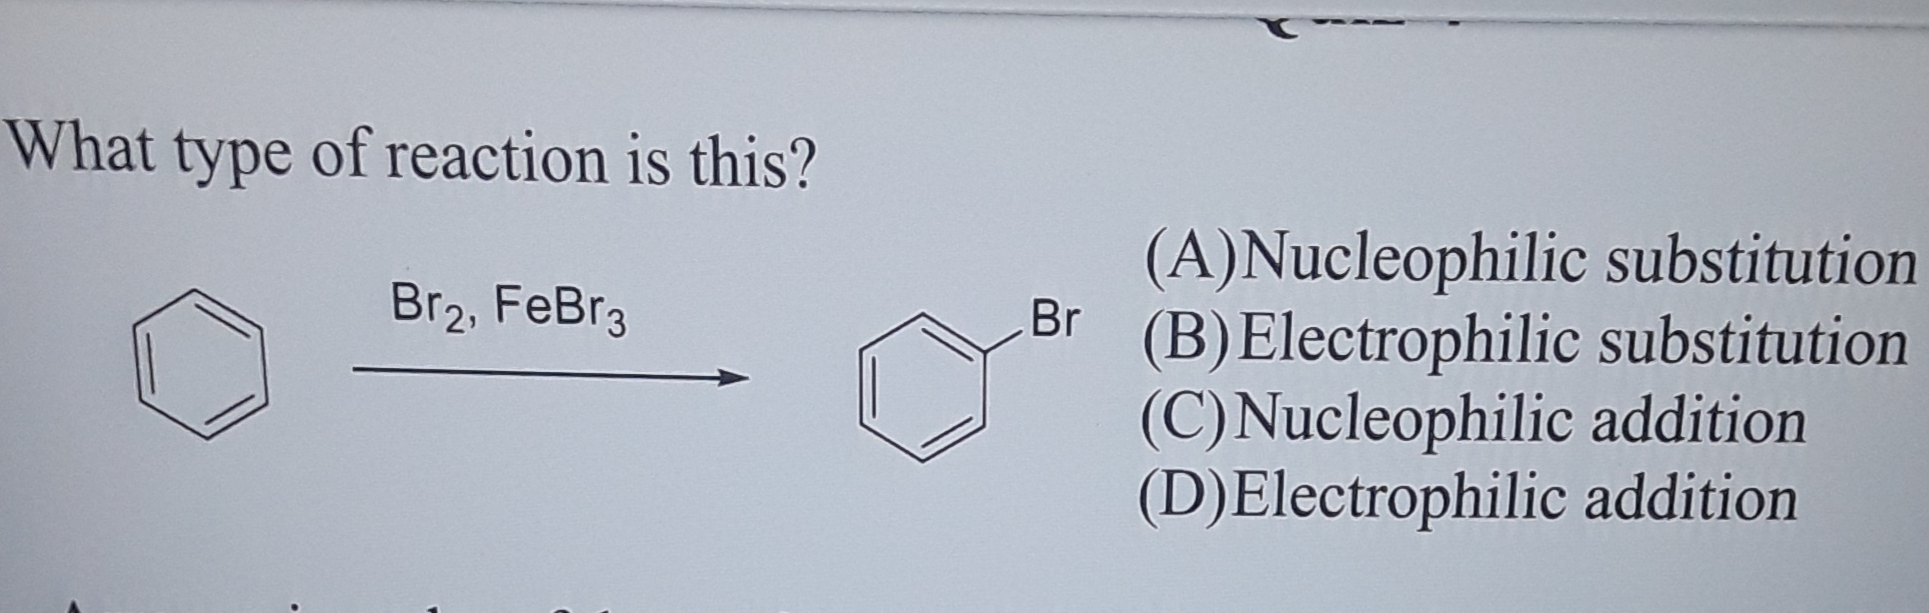 What type of reaction is this?
(A)Nucleophilic substitution
Br
(B)Electrophilic substitution
Br2, FeBr3
(C)Nucleophilic addition
(D)Electrophilic addition
